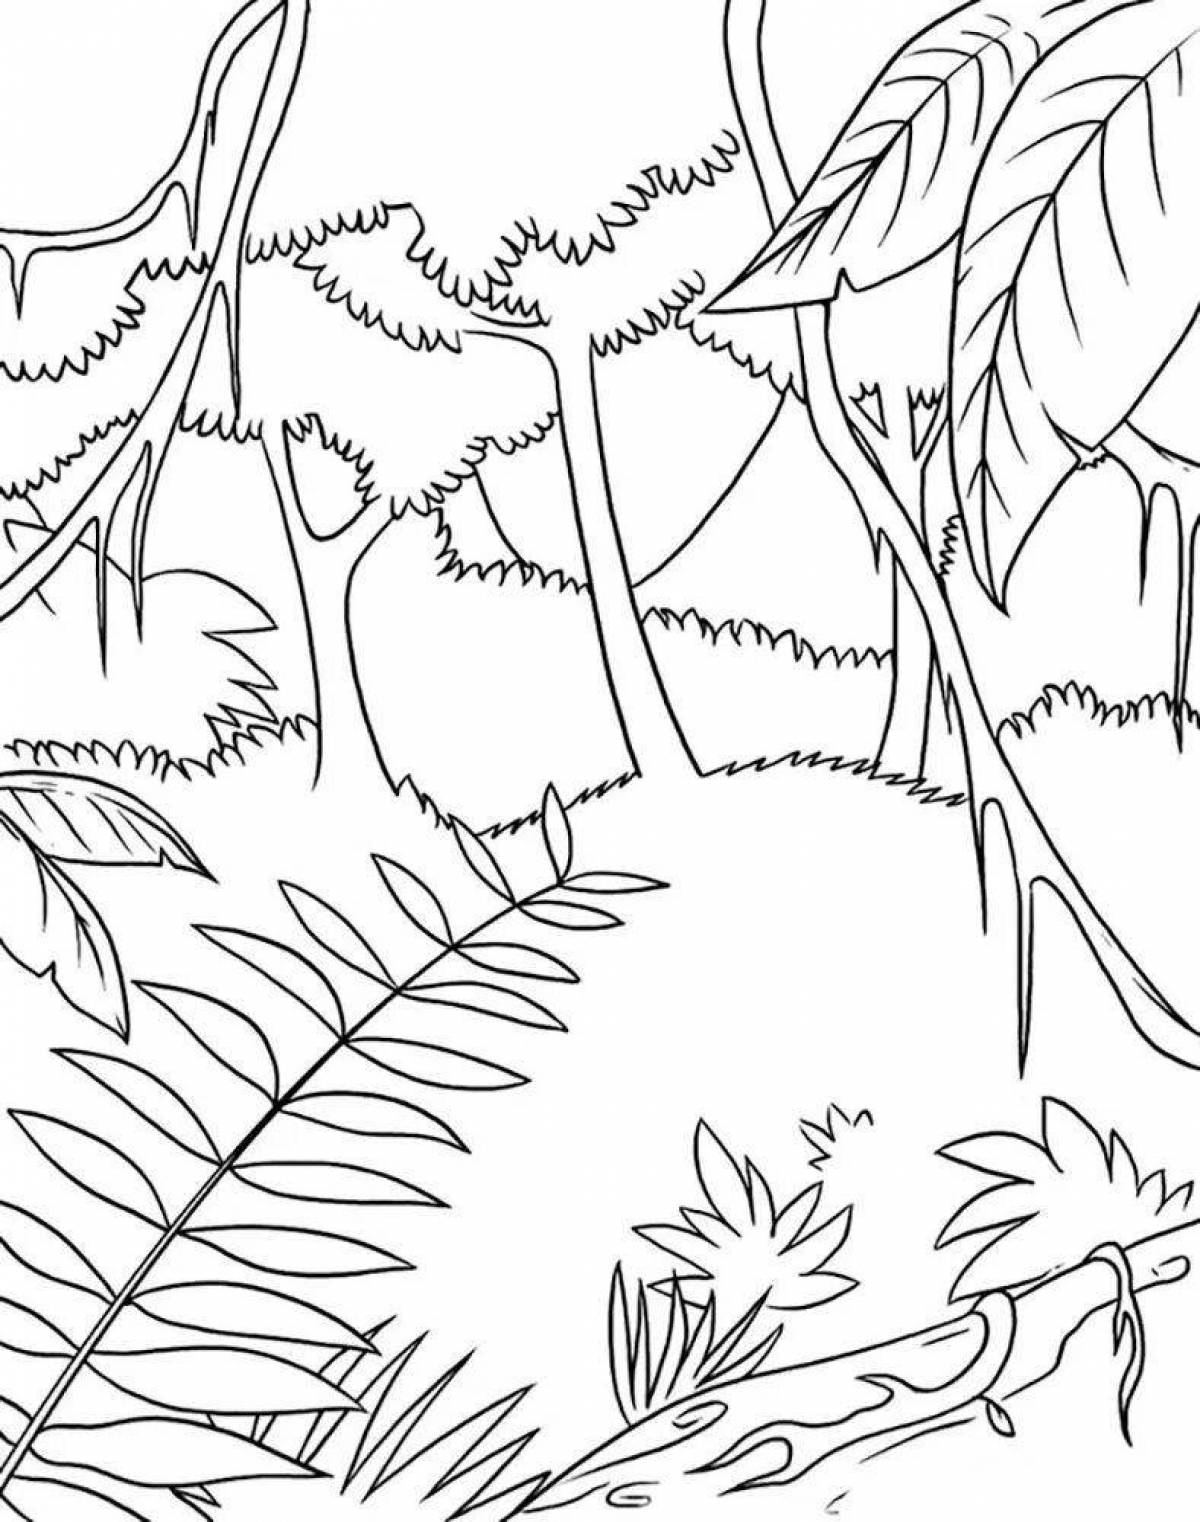 Vibrant tropical forest coloring book